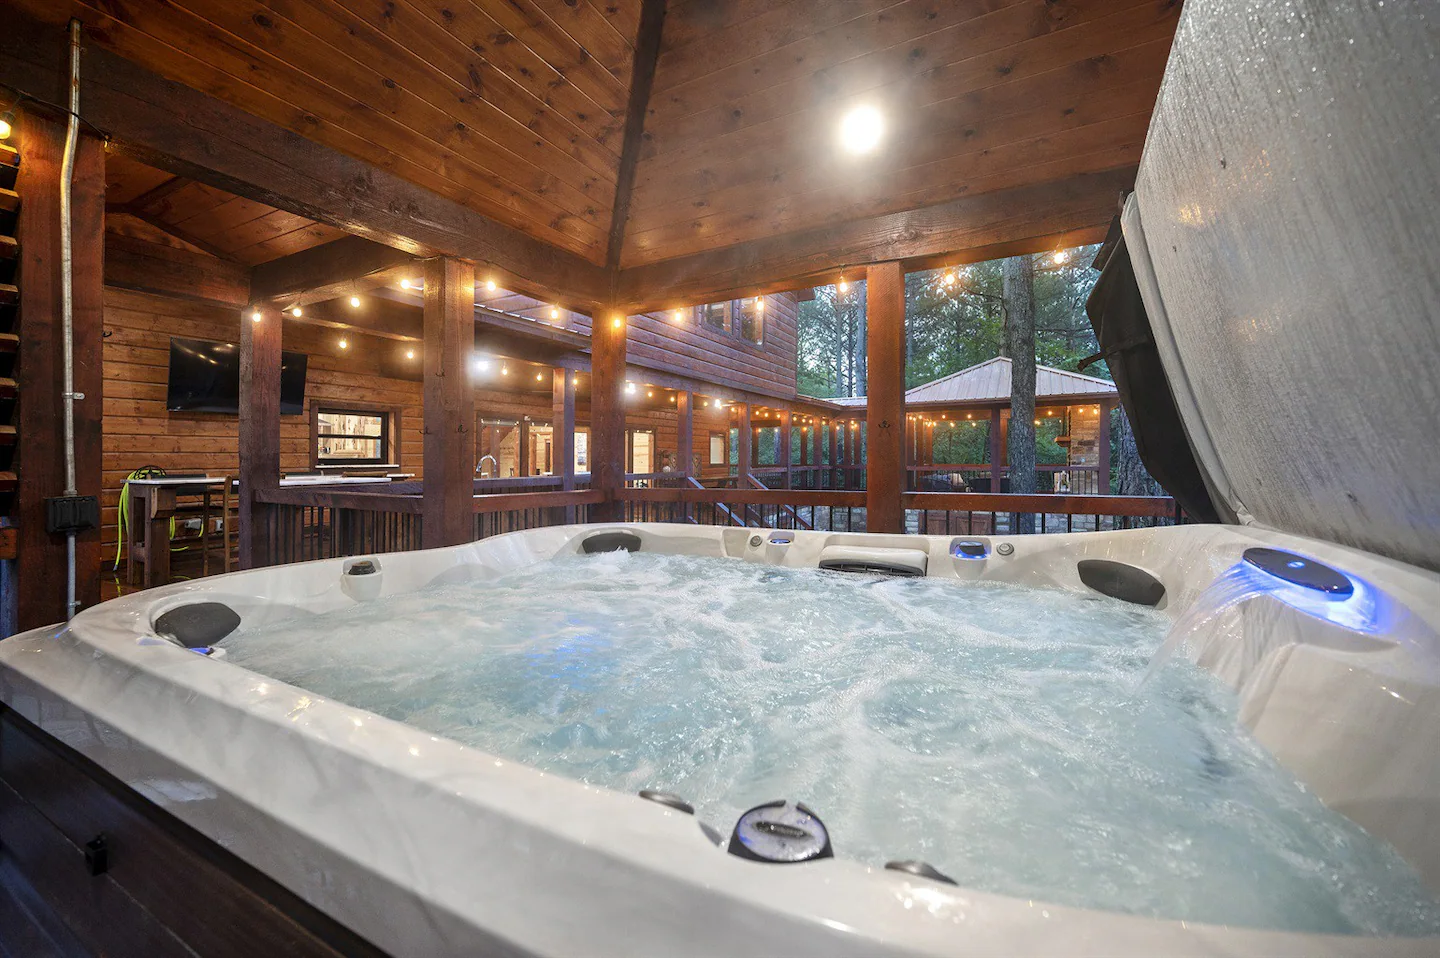 A spacious hot tub is located in its own dedicated area.

